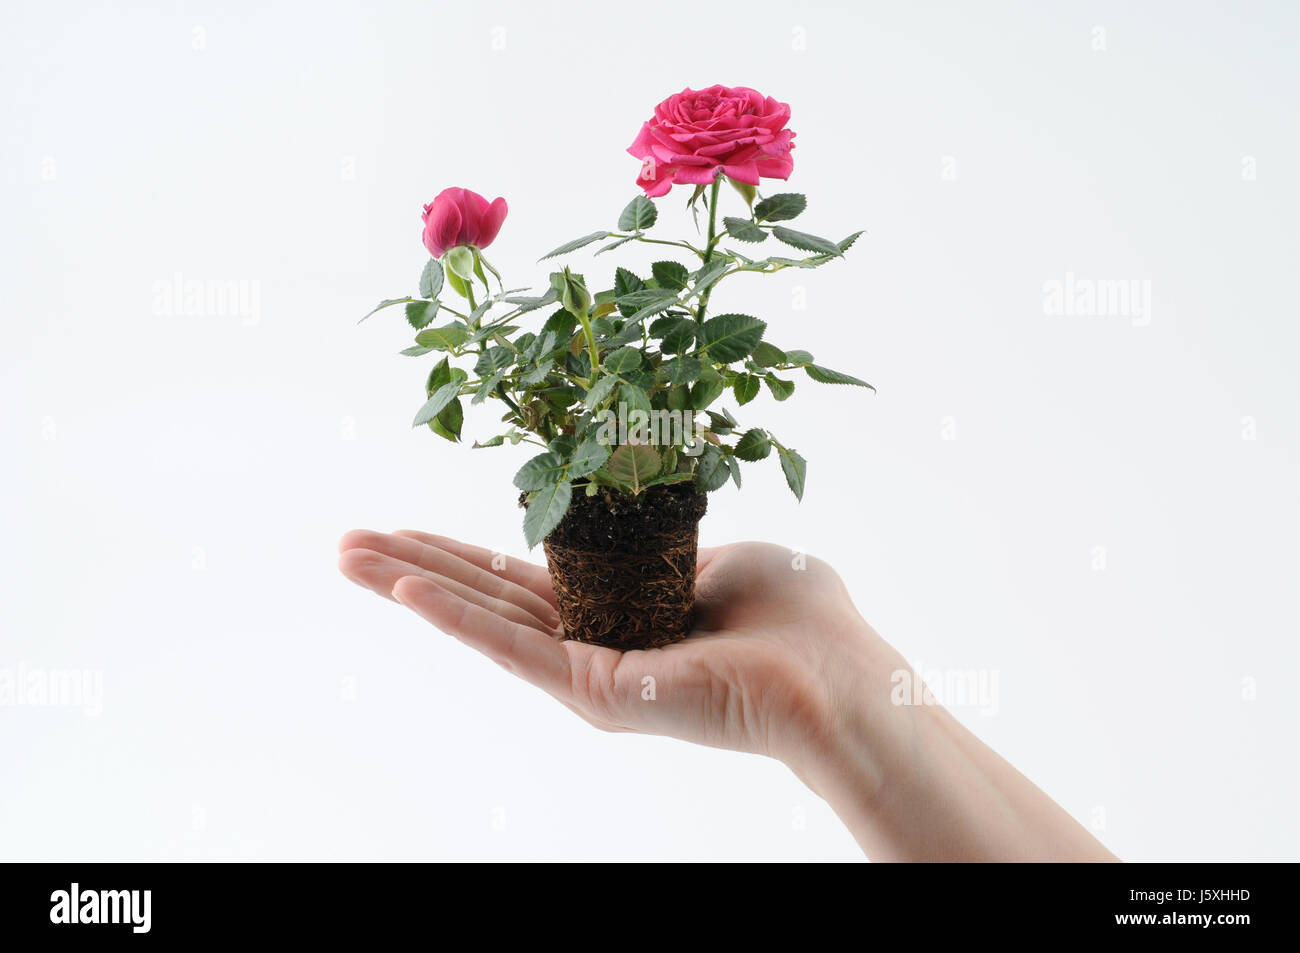 hand flower plant rose root hold hand isolated optional flower rose plant green Stock Photo